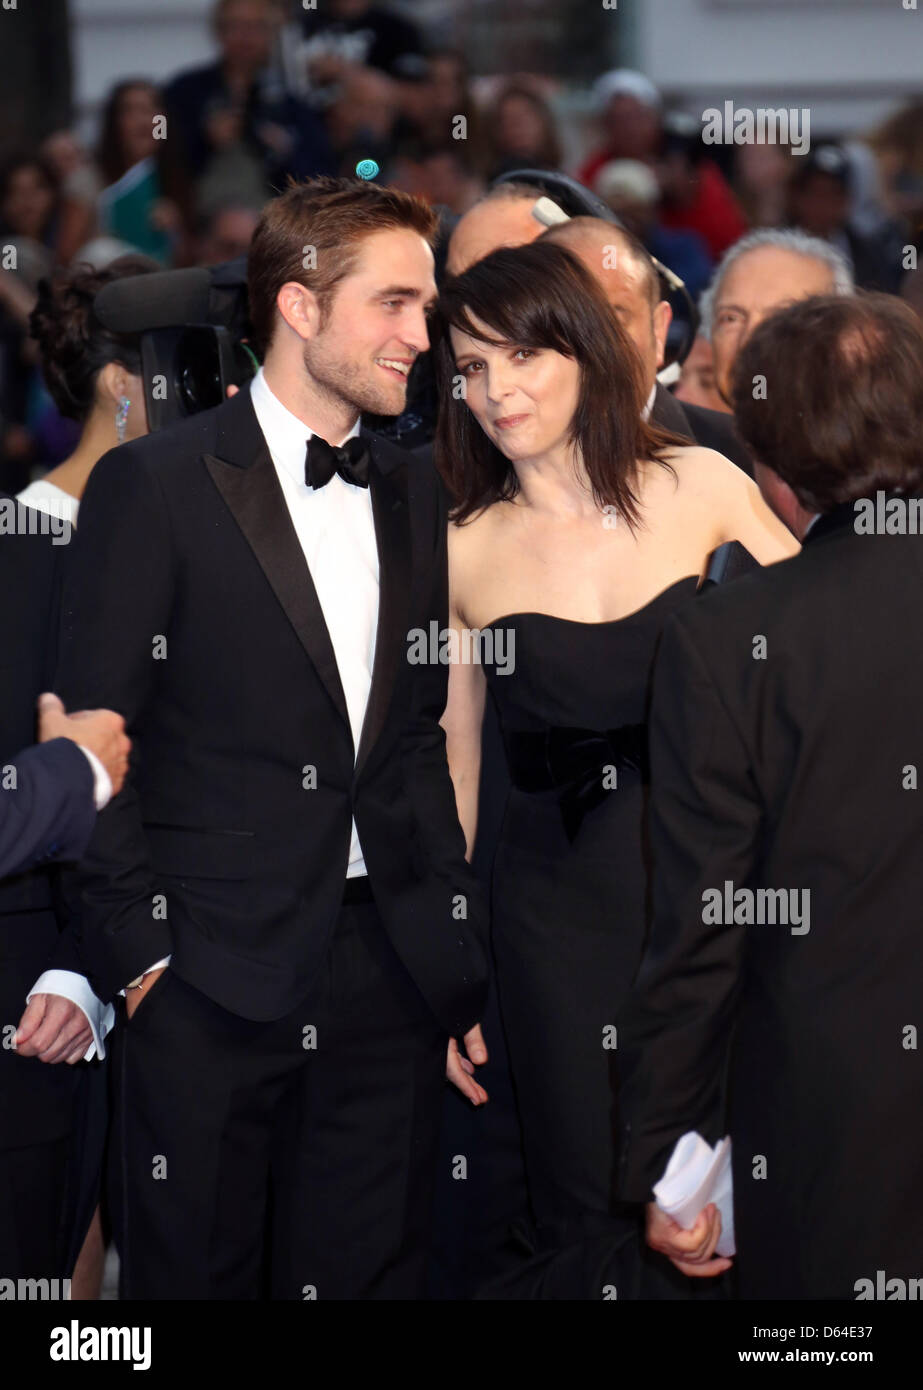 Actors Robert Pattinson and Juliette Binoche arrive at the premiere of 'Cosmopolis' during the 65th Cannes Film Festival at Palais des Festivals in Cannes, France, on 25 May 2012. Photo: Hubert Boesl Stock Photo